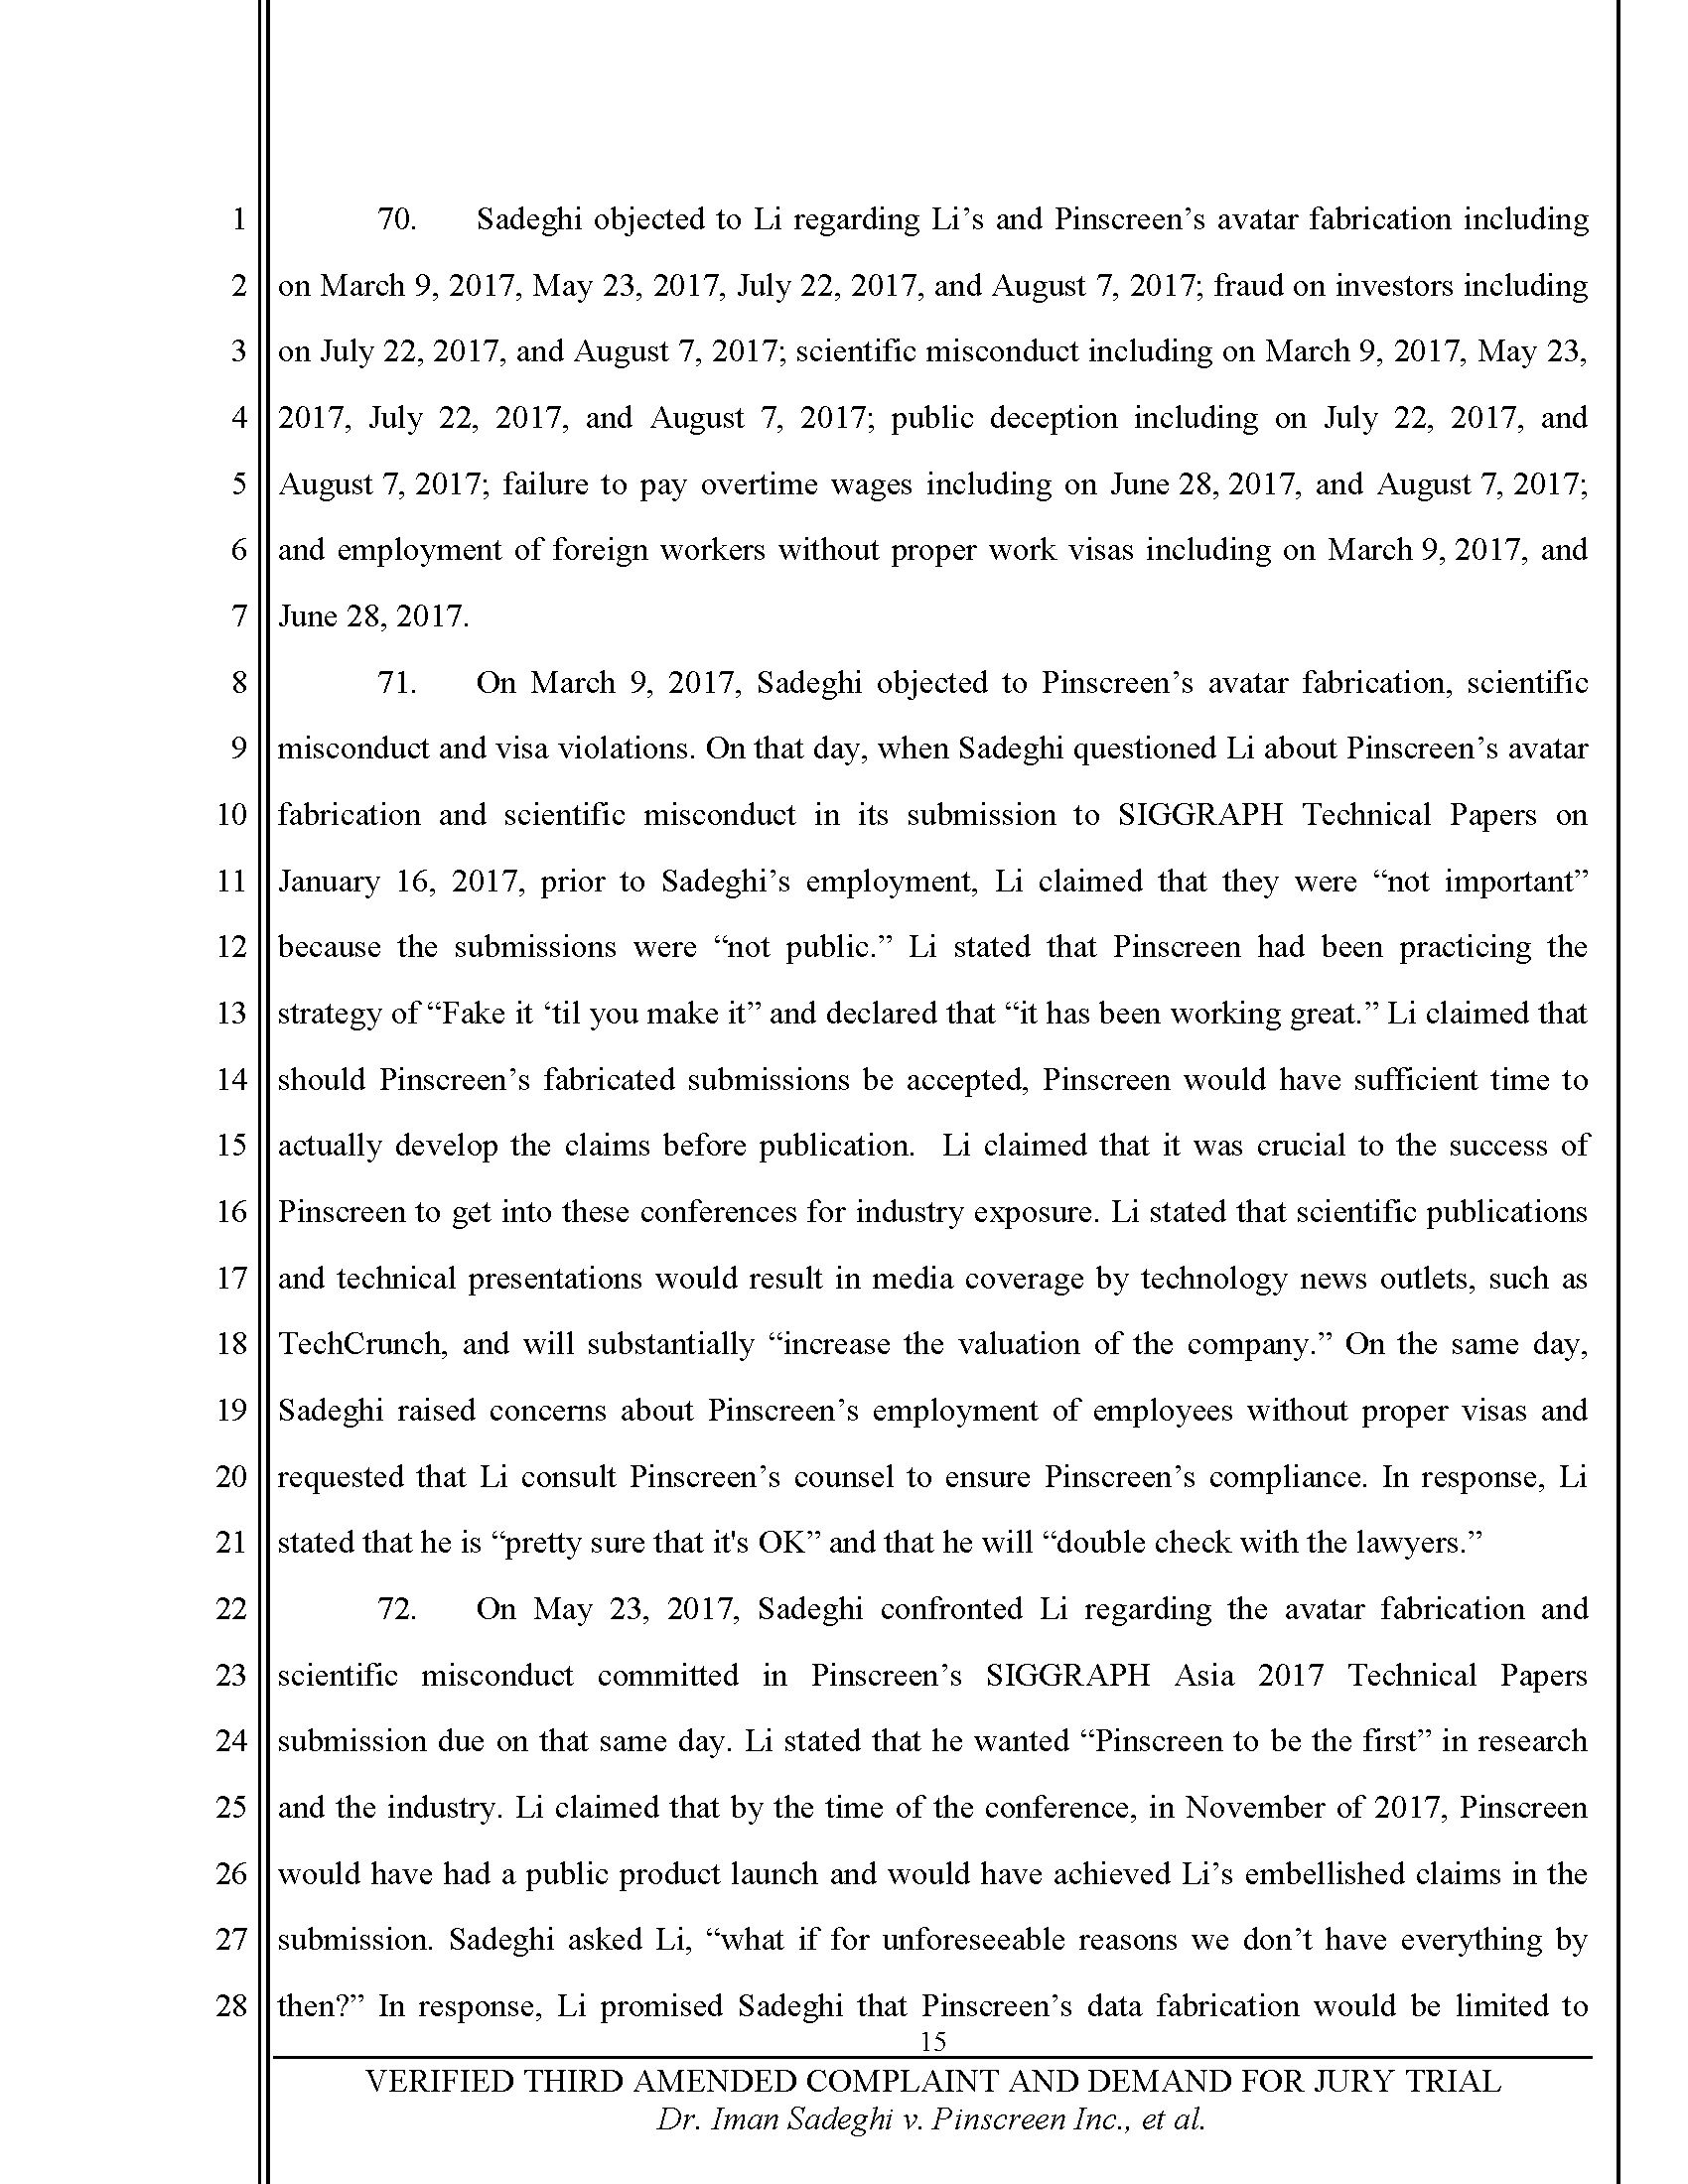 Third Amended Complaint (TAC) Page 16